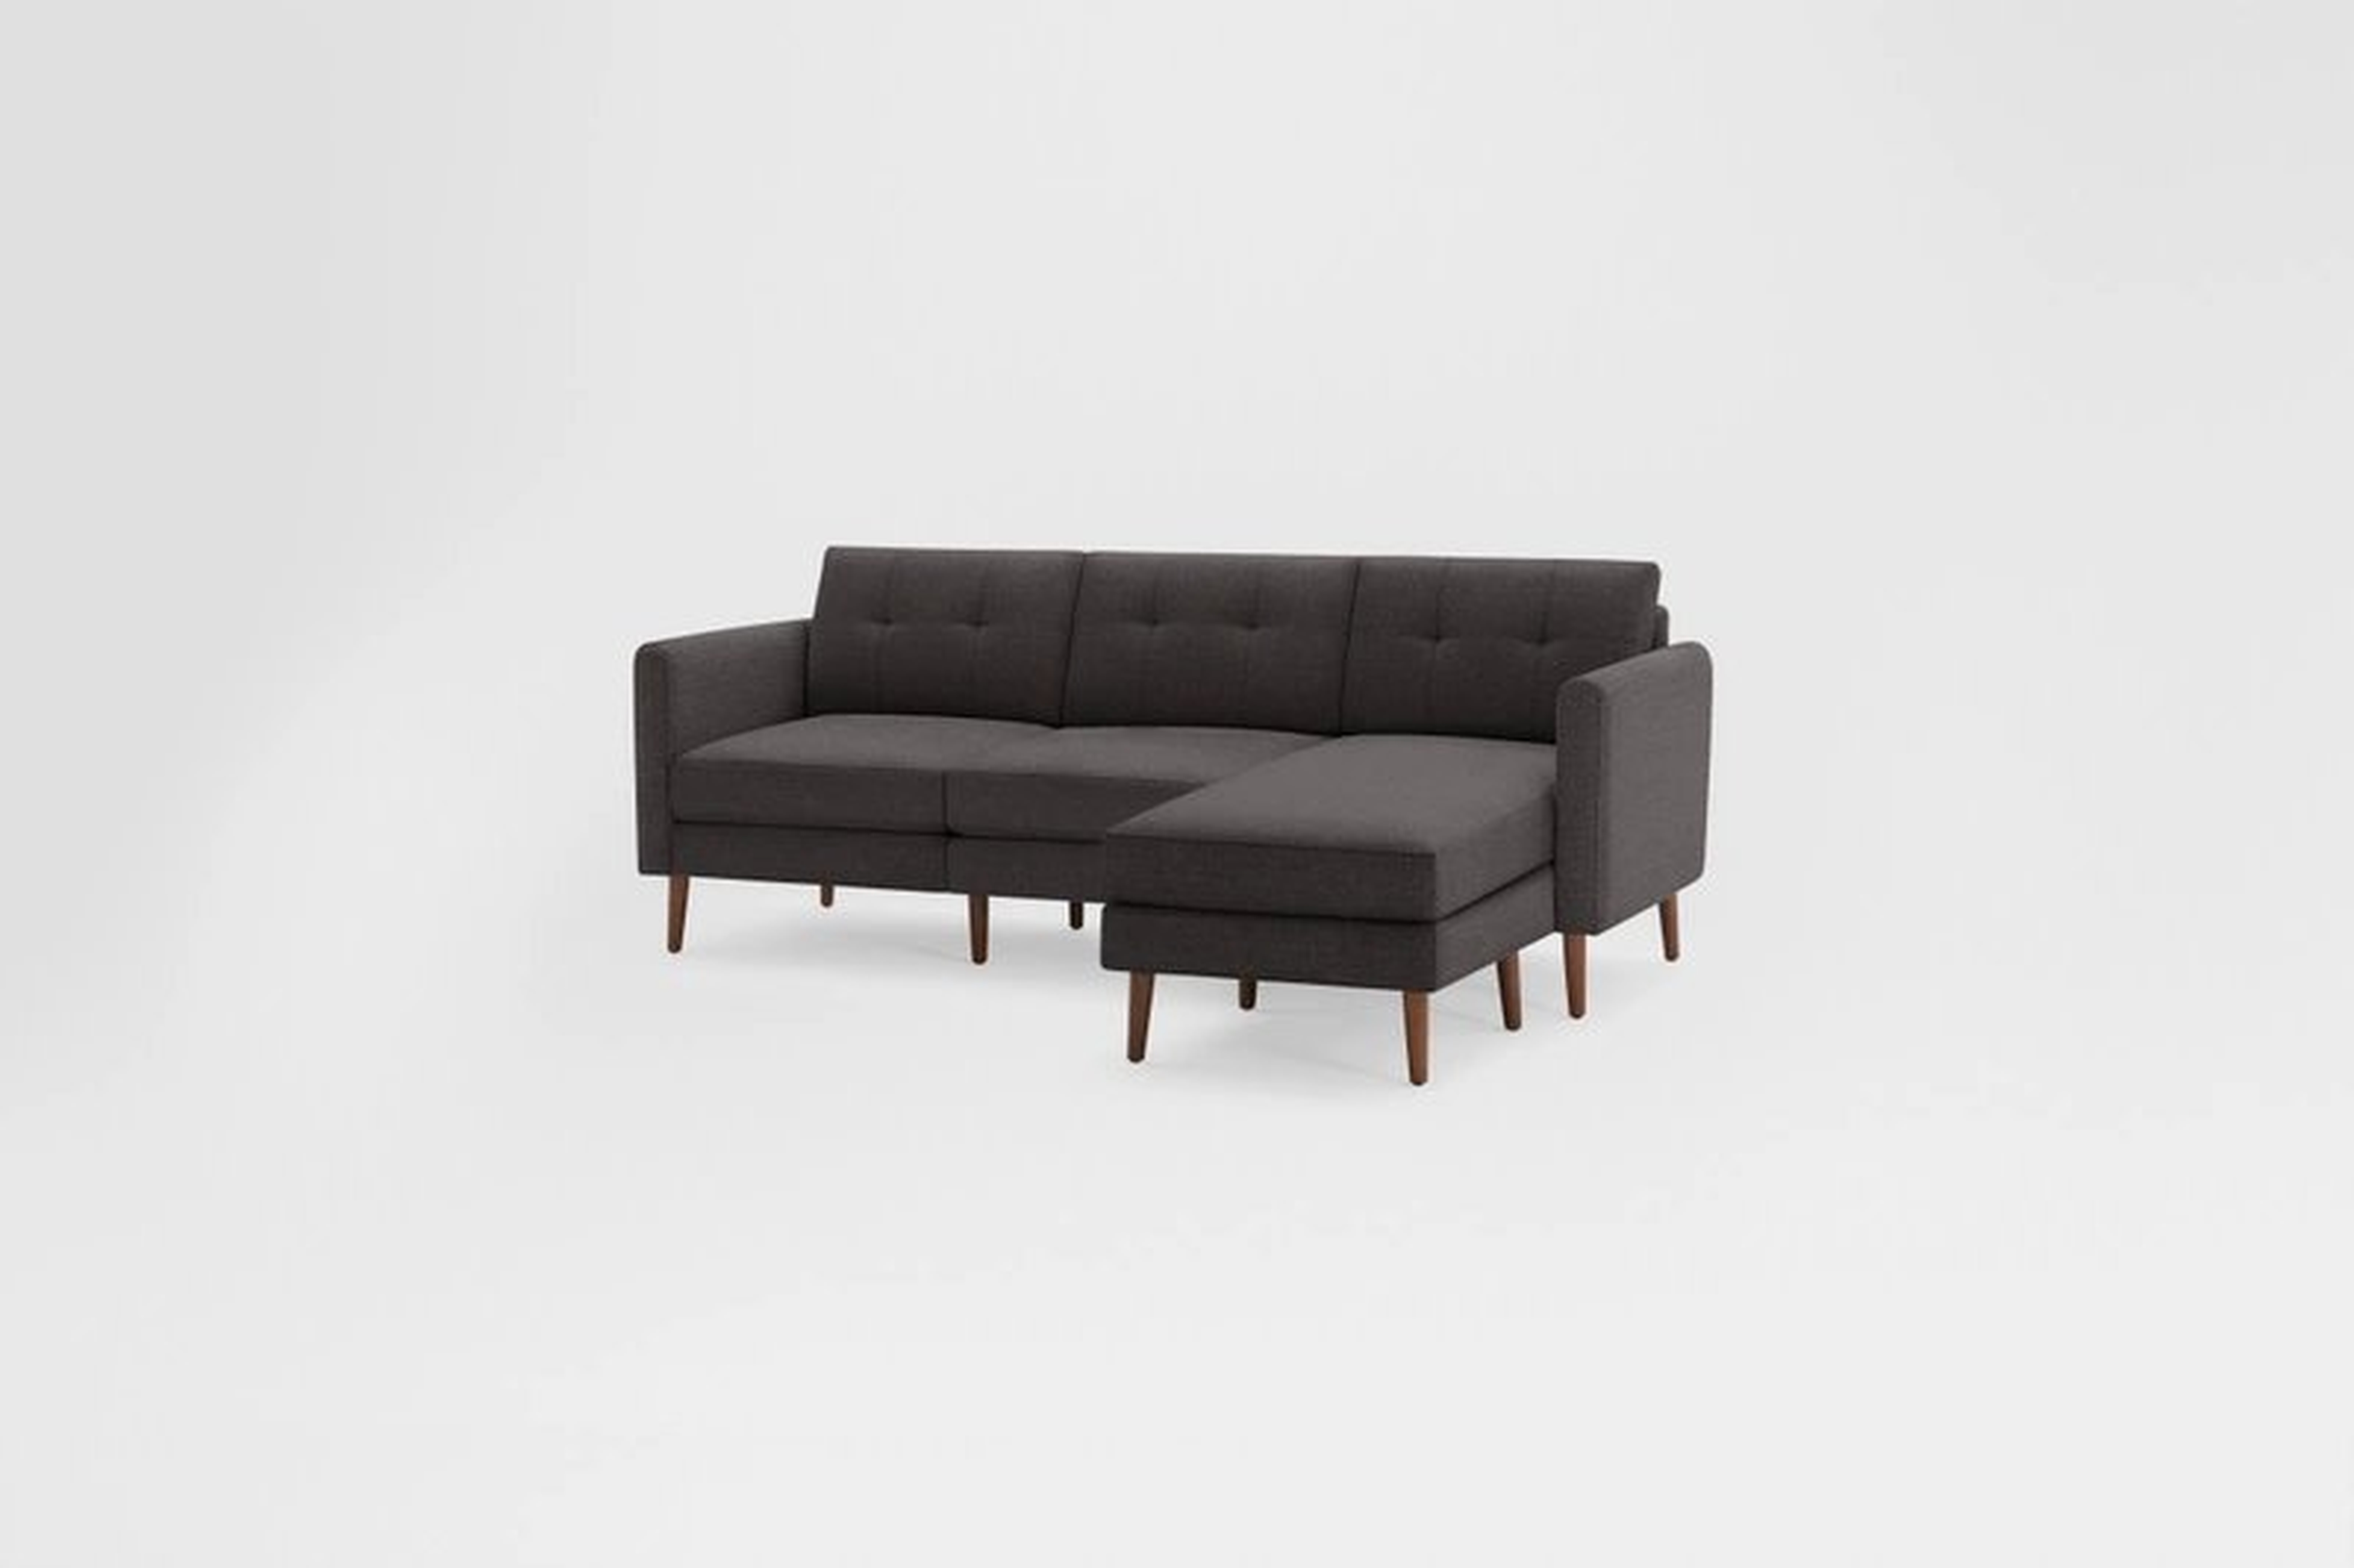 Nomad Sofa Sectional - charcoal - dark wood legs - high arms - Burrow